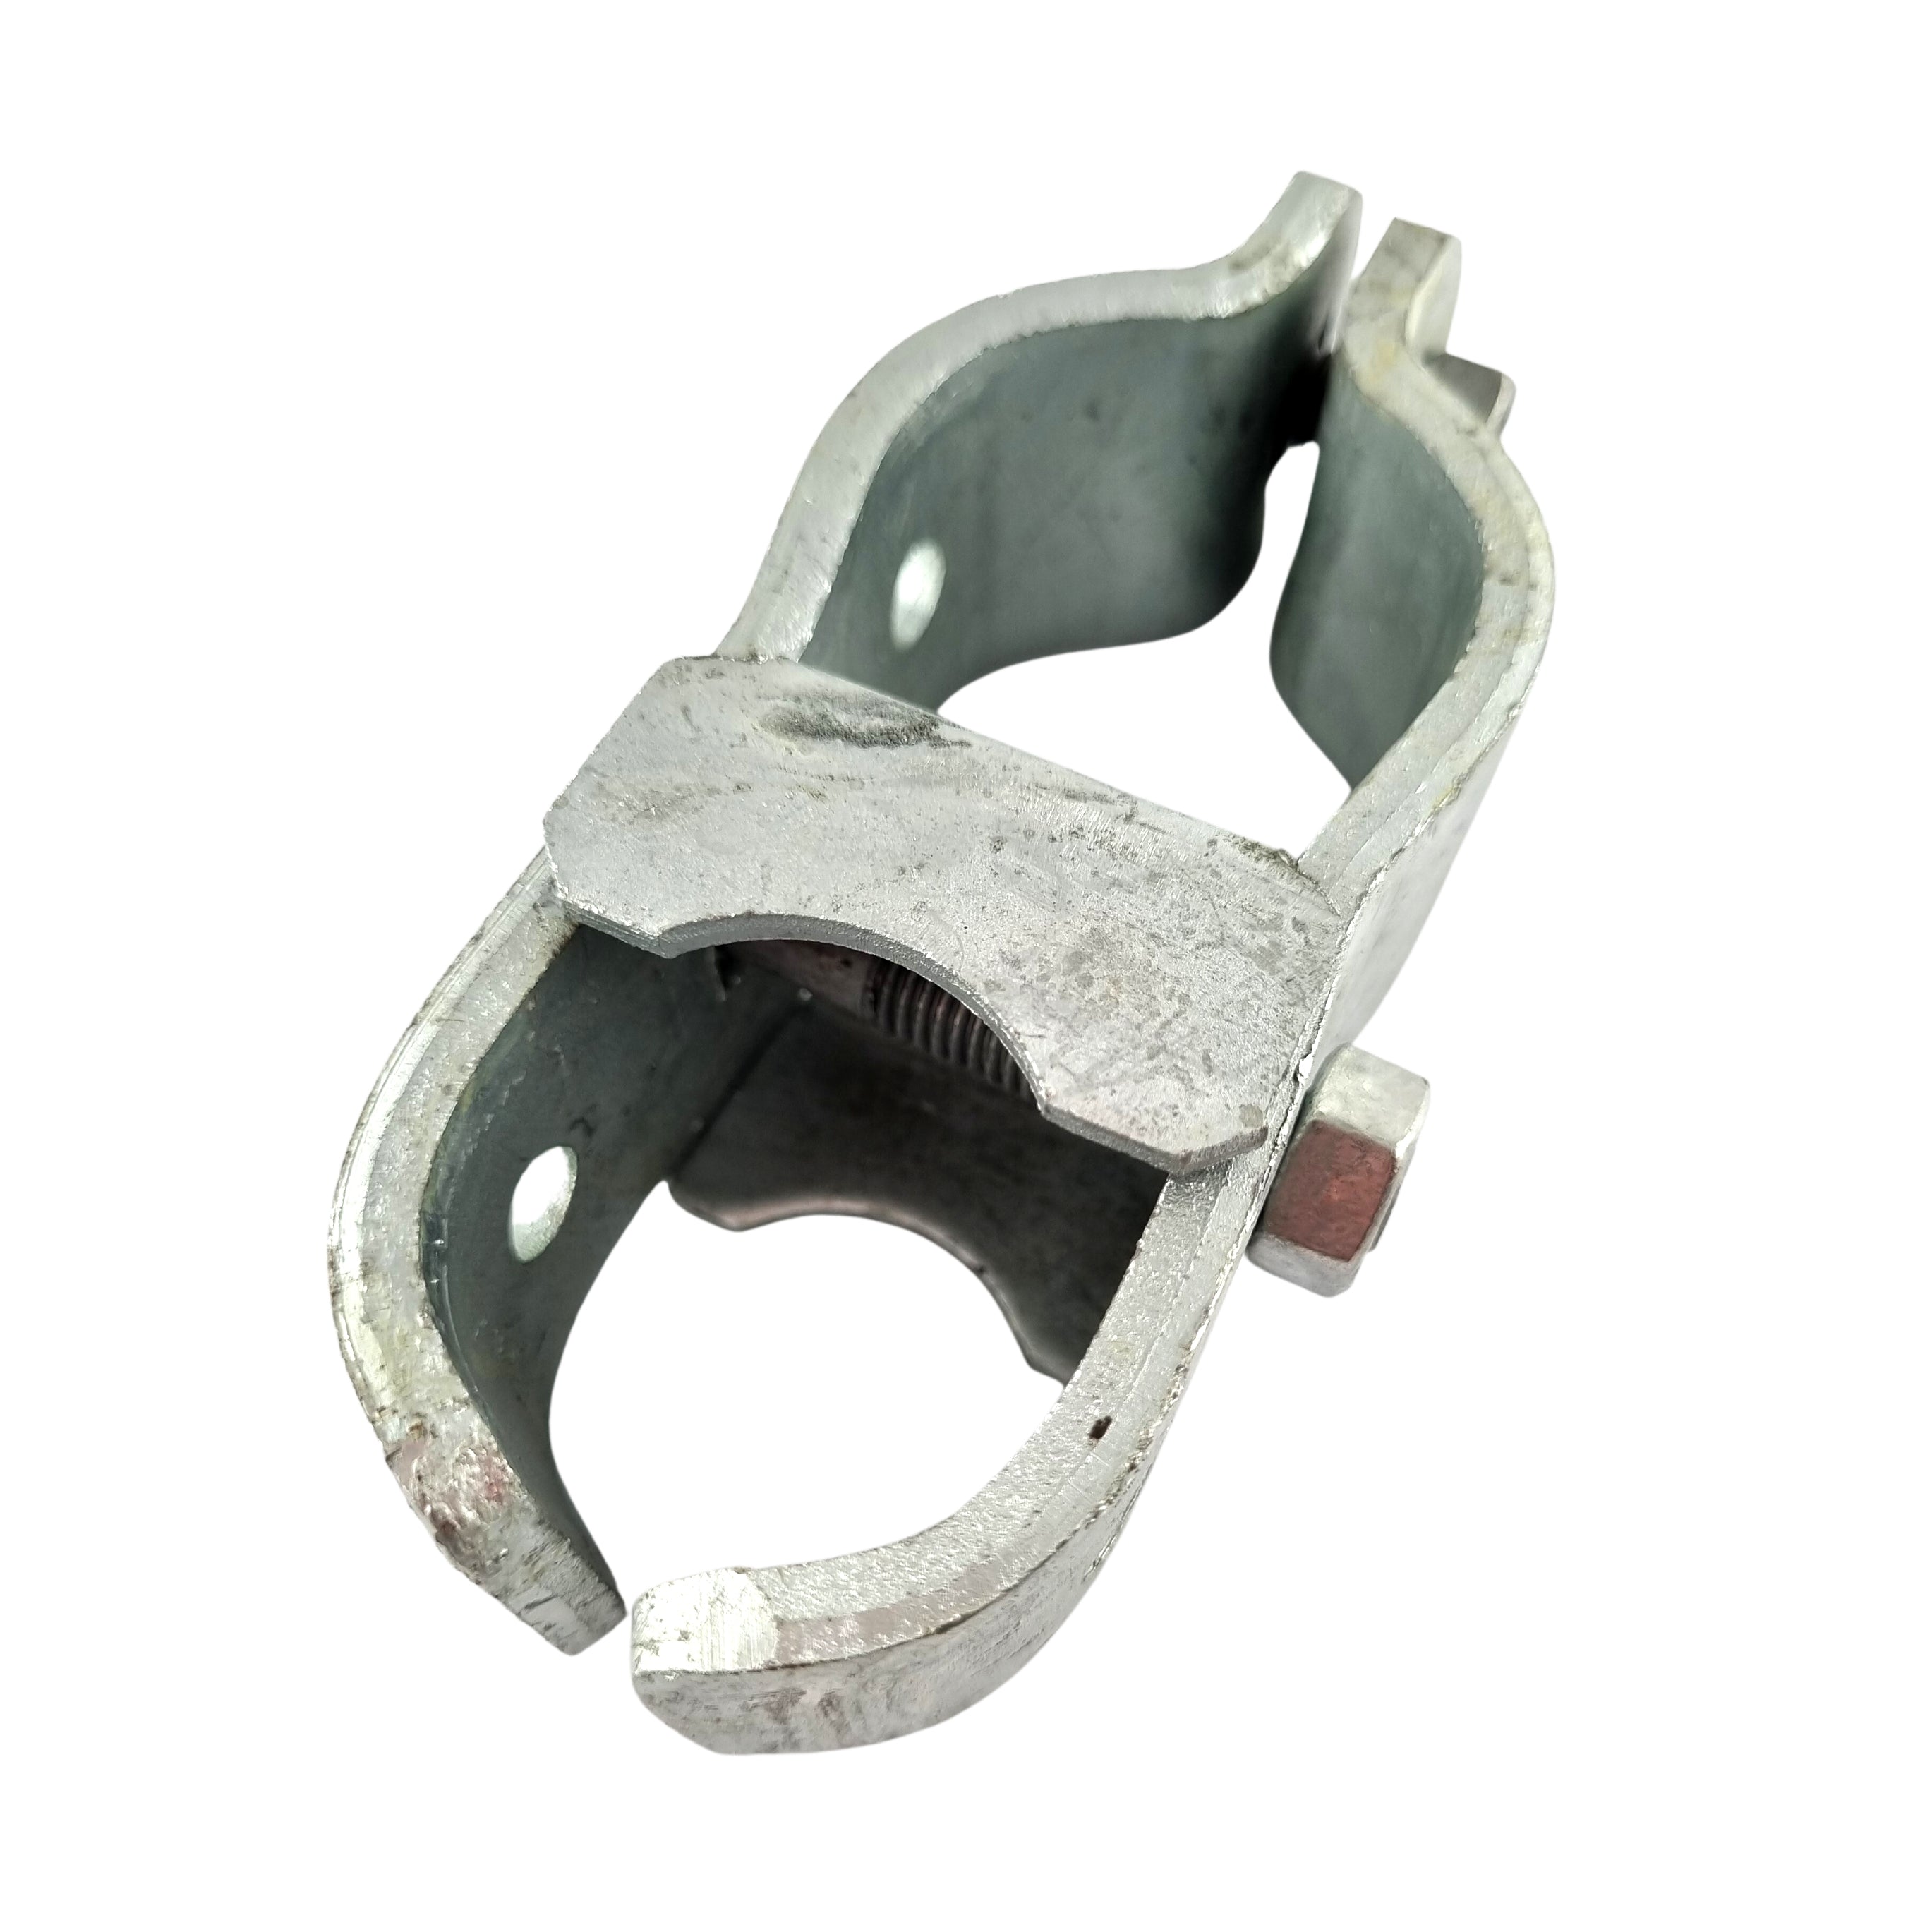 Two Part Hinge + Attachment - Galvanised. Various sizes. Shop Fence & Gate Fittings online at chain.com.au. Shipping Australia wide.